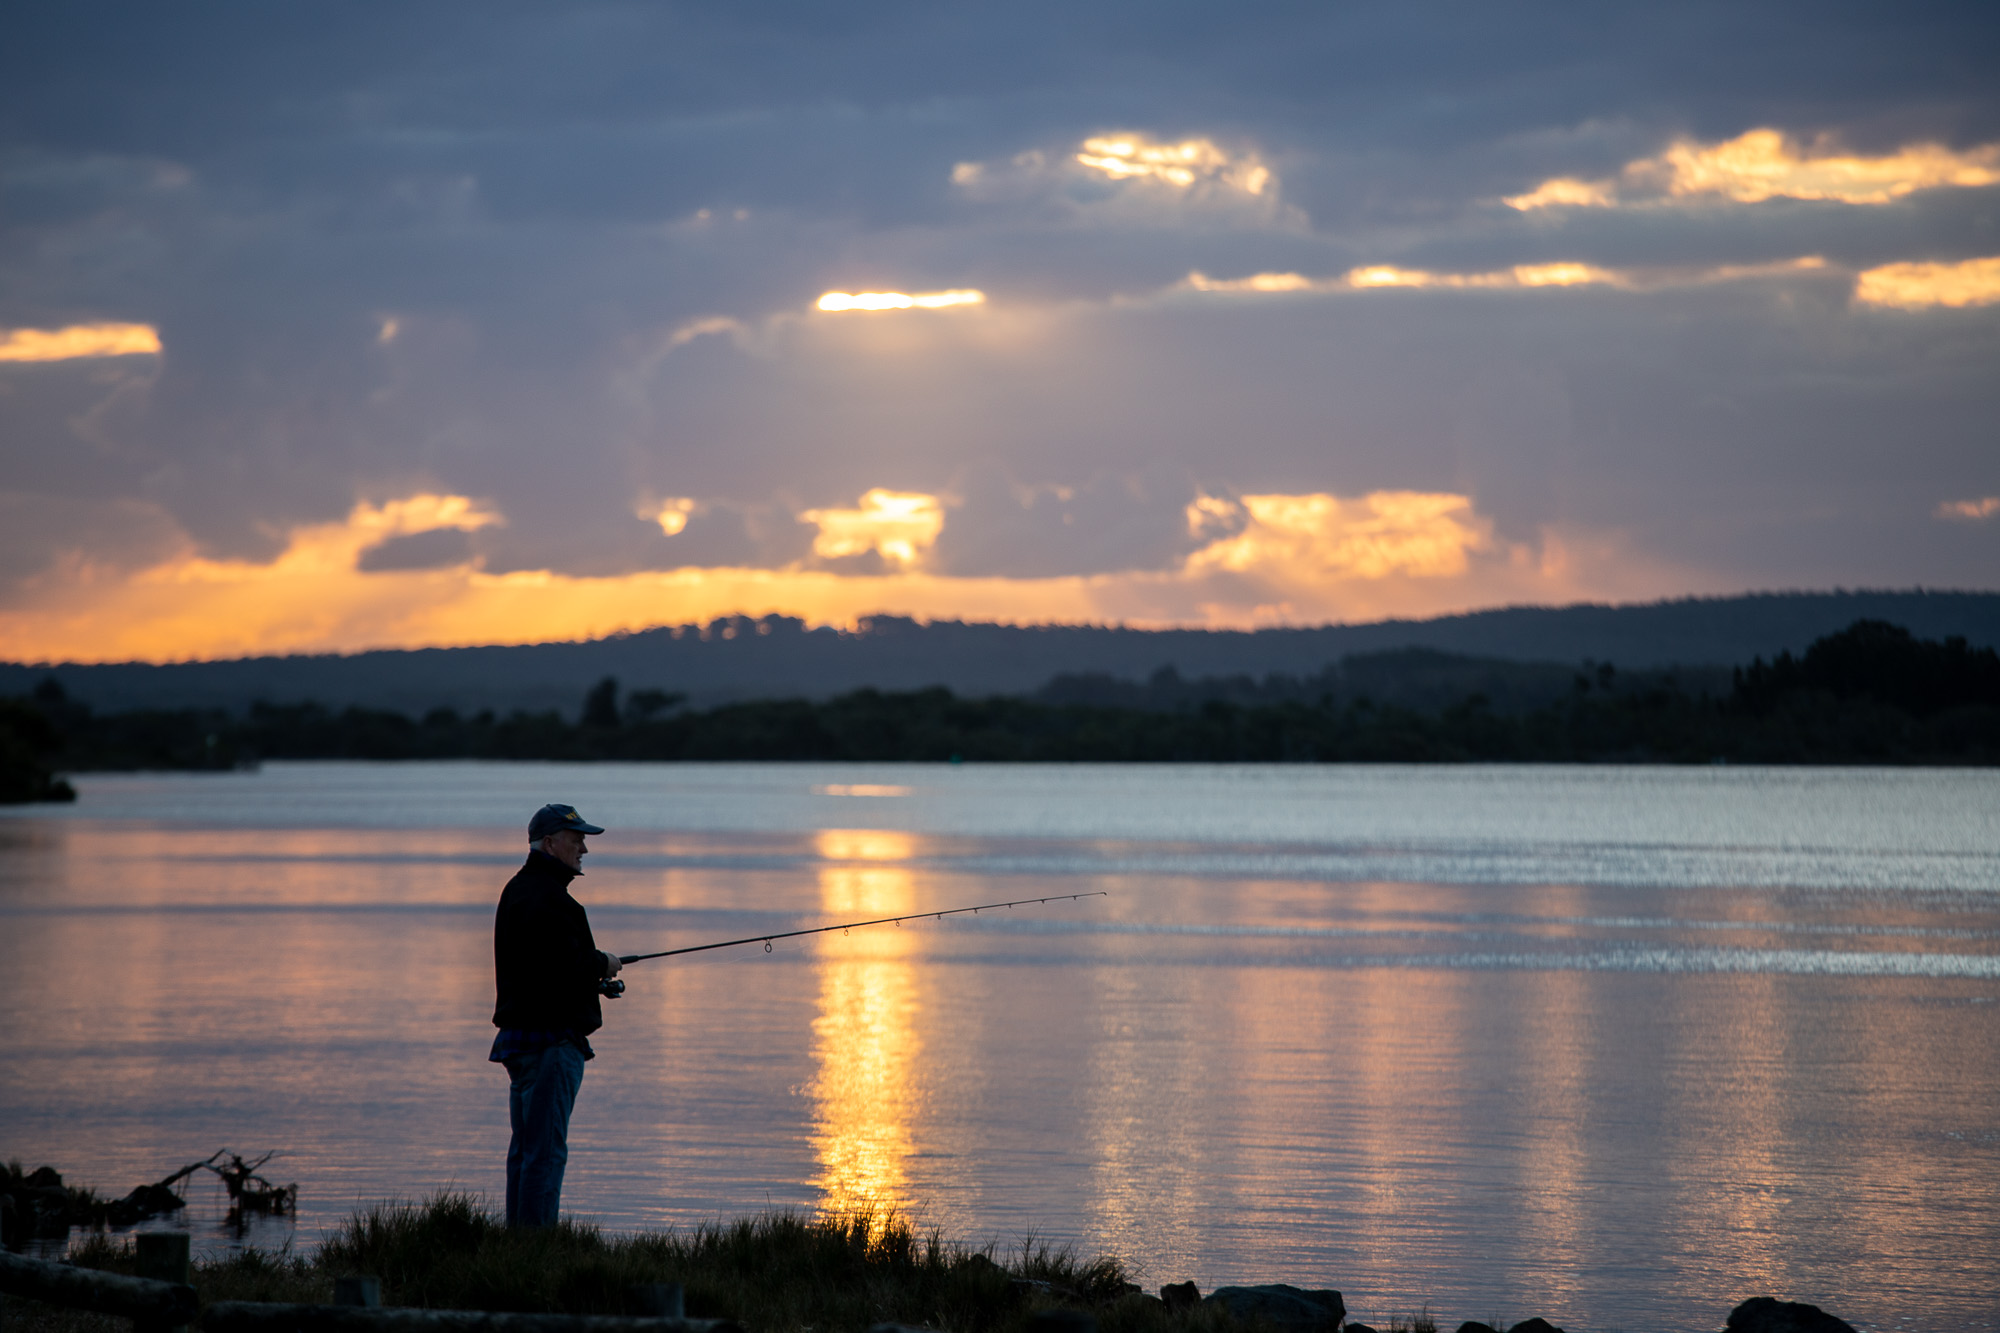 Fisherman silhouetted against the setting sun using a fast shutter speed